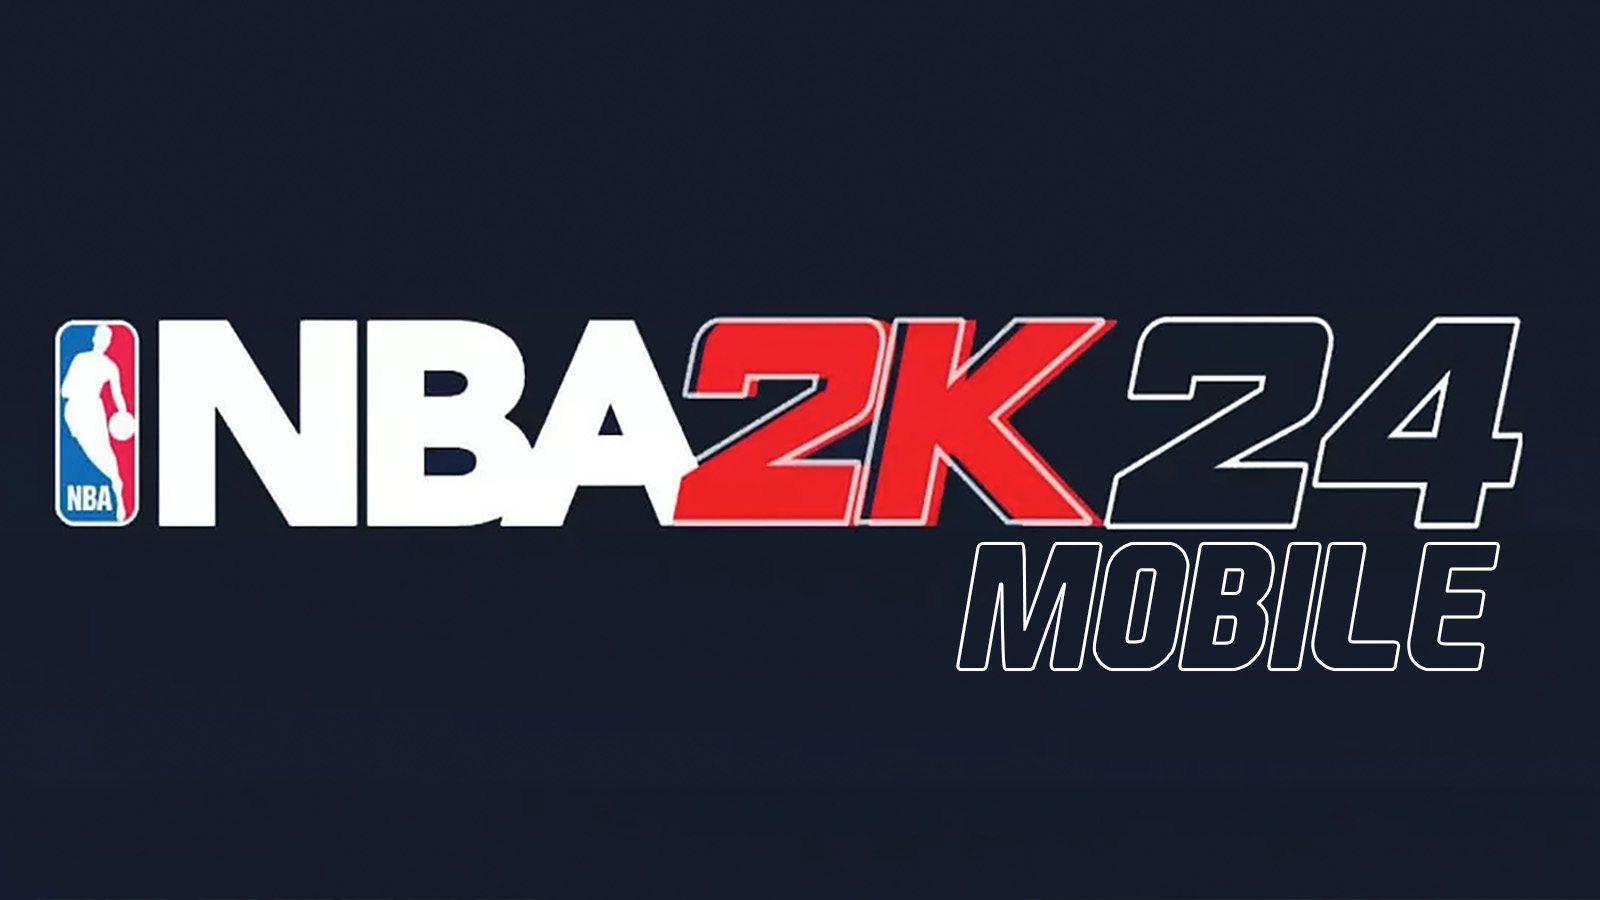 Download NBA 2K24 Mobile for your Android or iPhones.